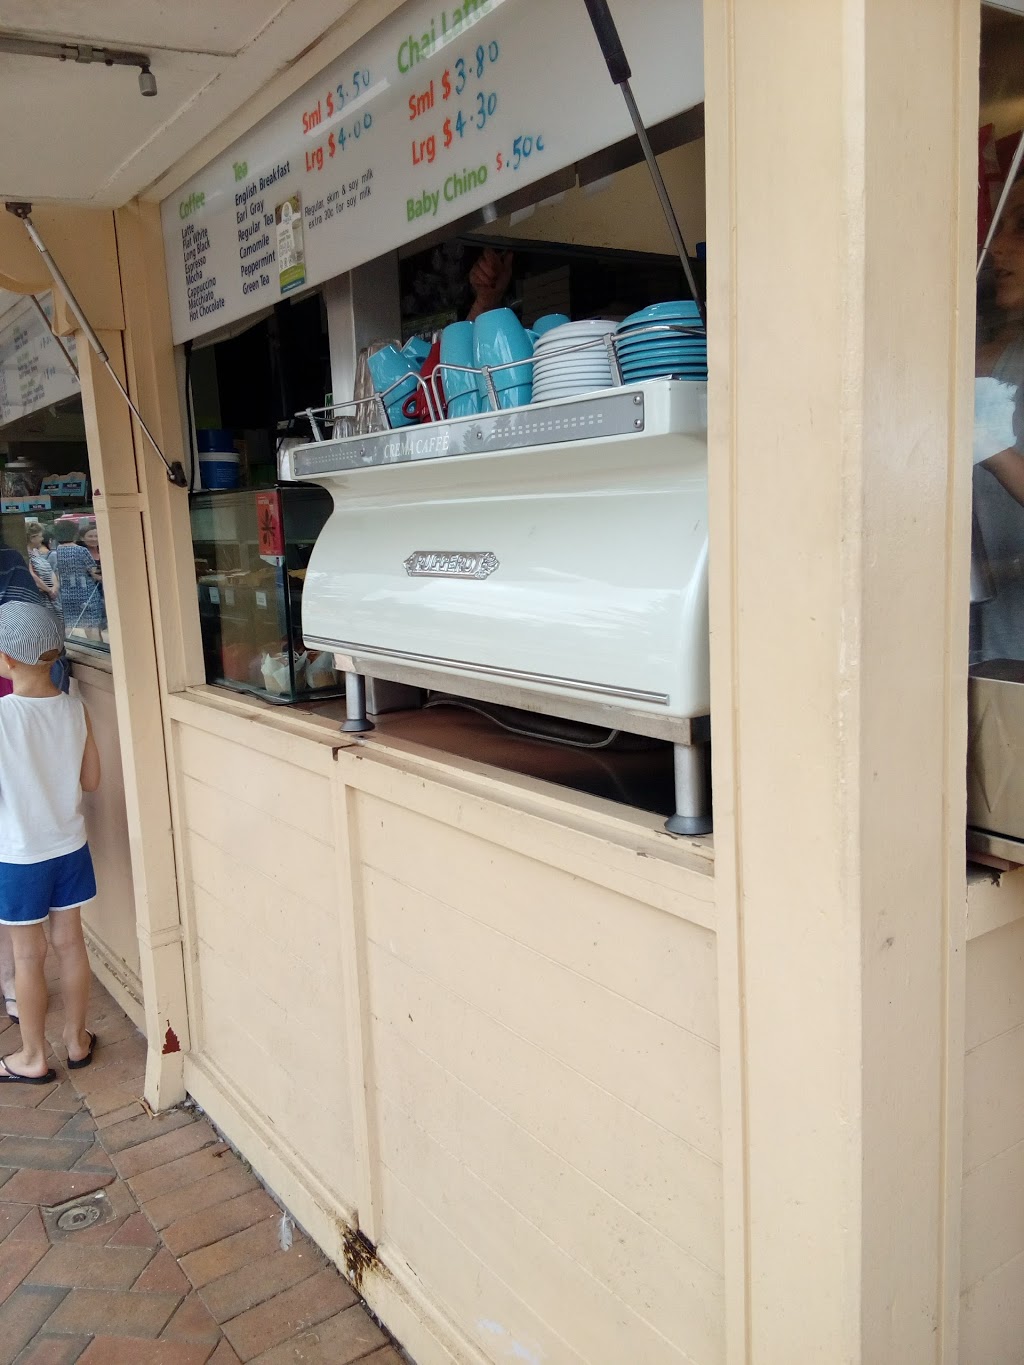 The Coogee Bay Kiosk | bakery | 190 Arden St, Coogee NSW 2034, Australia